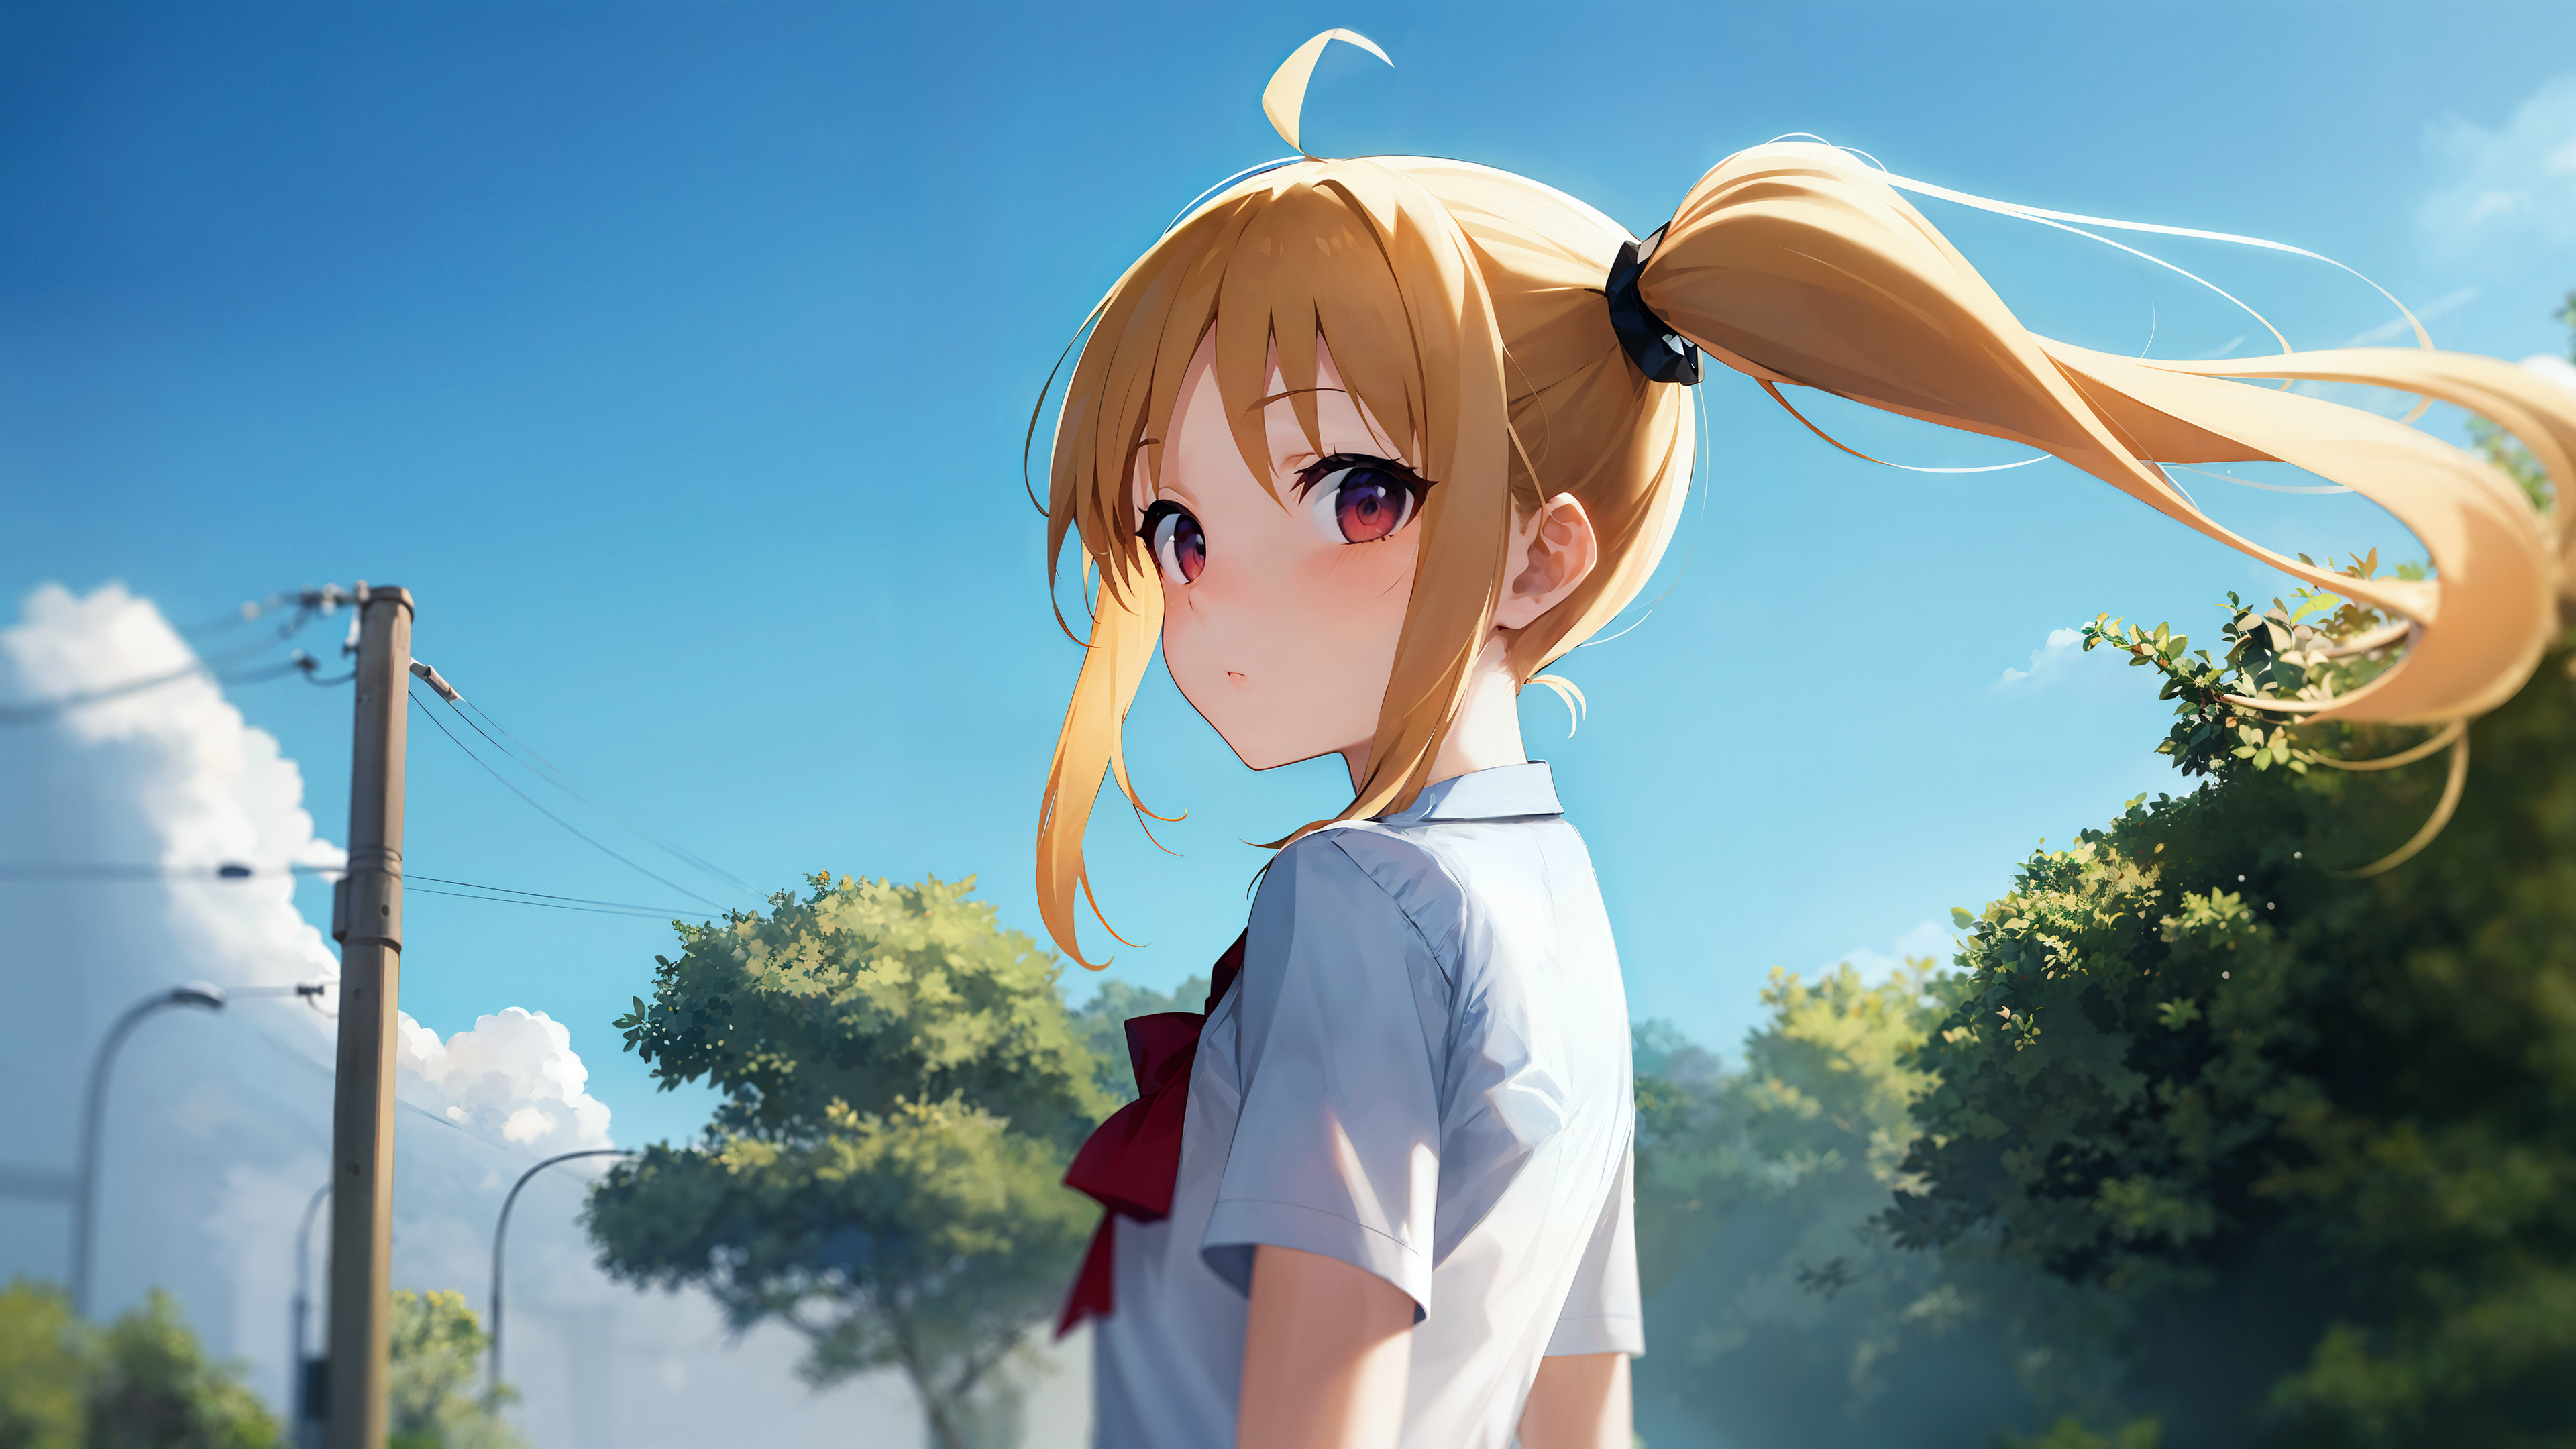 Anime Girl In A Ponytail